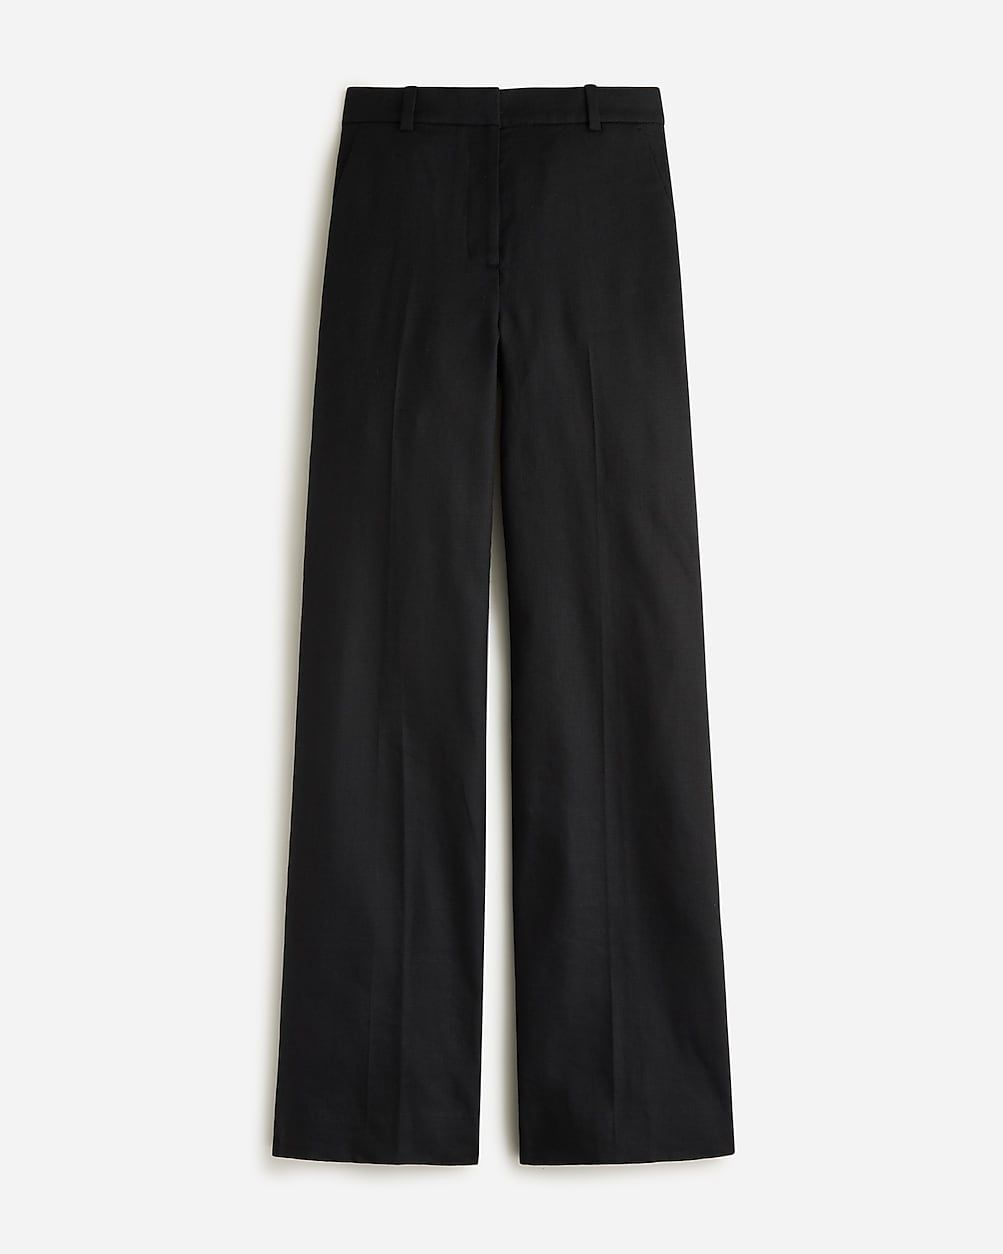 High-rise trouser pant in stretch linen blend | J.Crew US